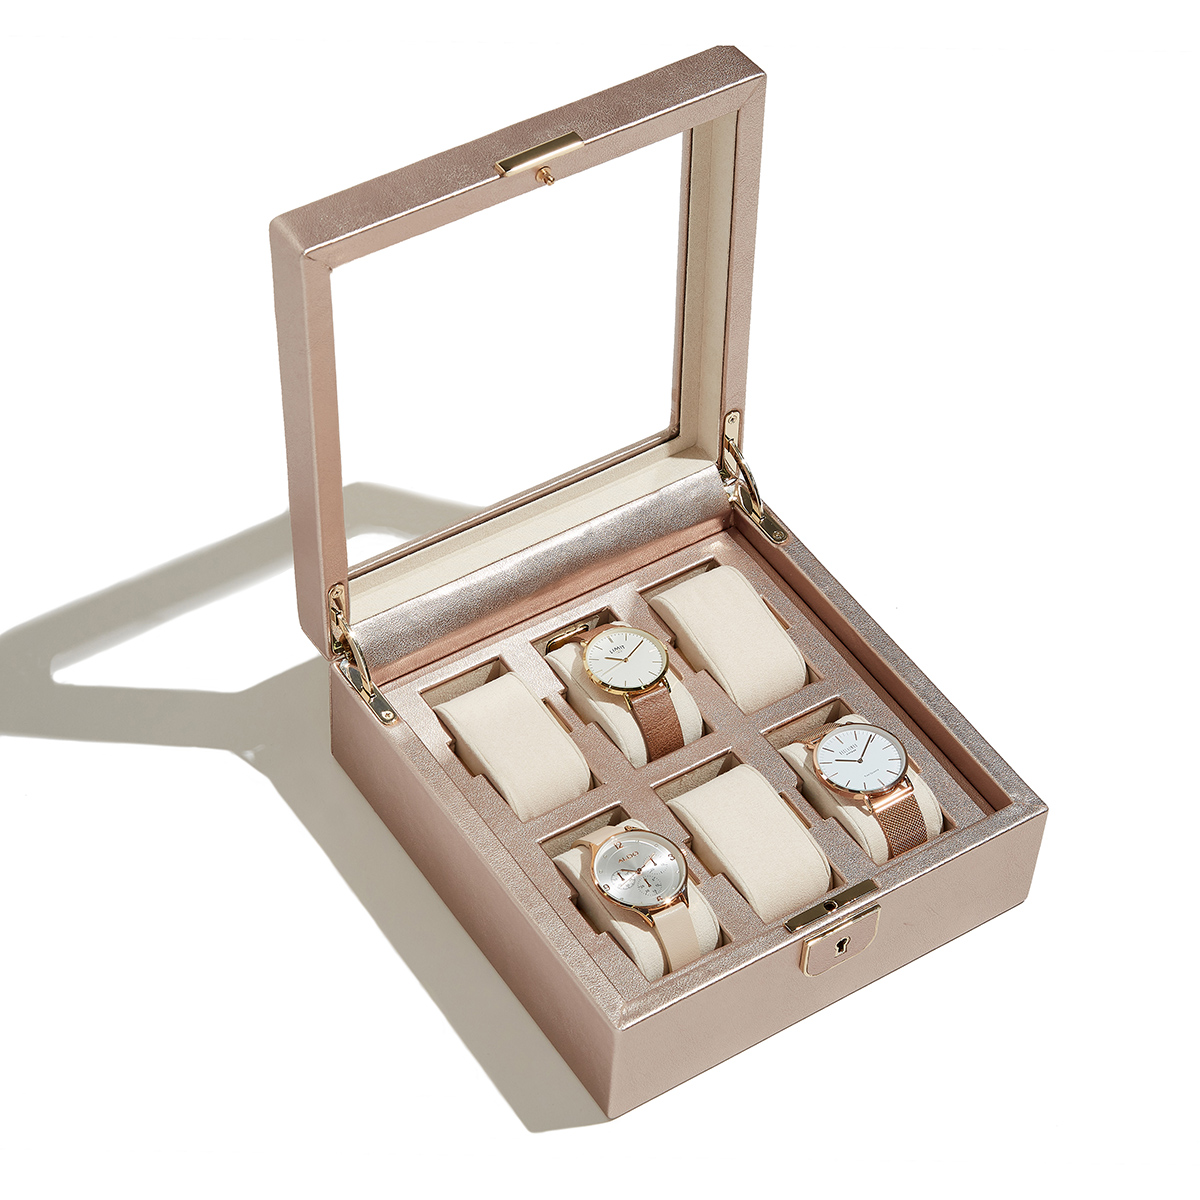 Charming and sophisticated, Palermo ranges across seven styles including Watch Winders, Jewellery Boxes and more.

Explore Palermo and find the perfect style, made for you.

#WOLF1834 #MadeForYou #ProtectYourLegacy #WatchWinder #JewelleryBox  #WatchAccessories